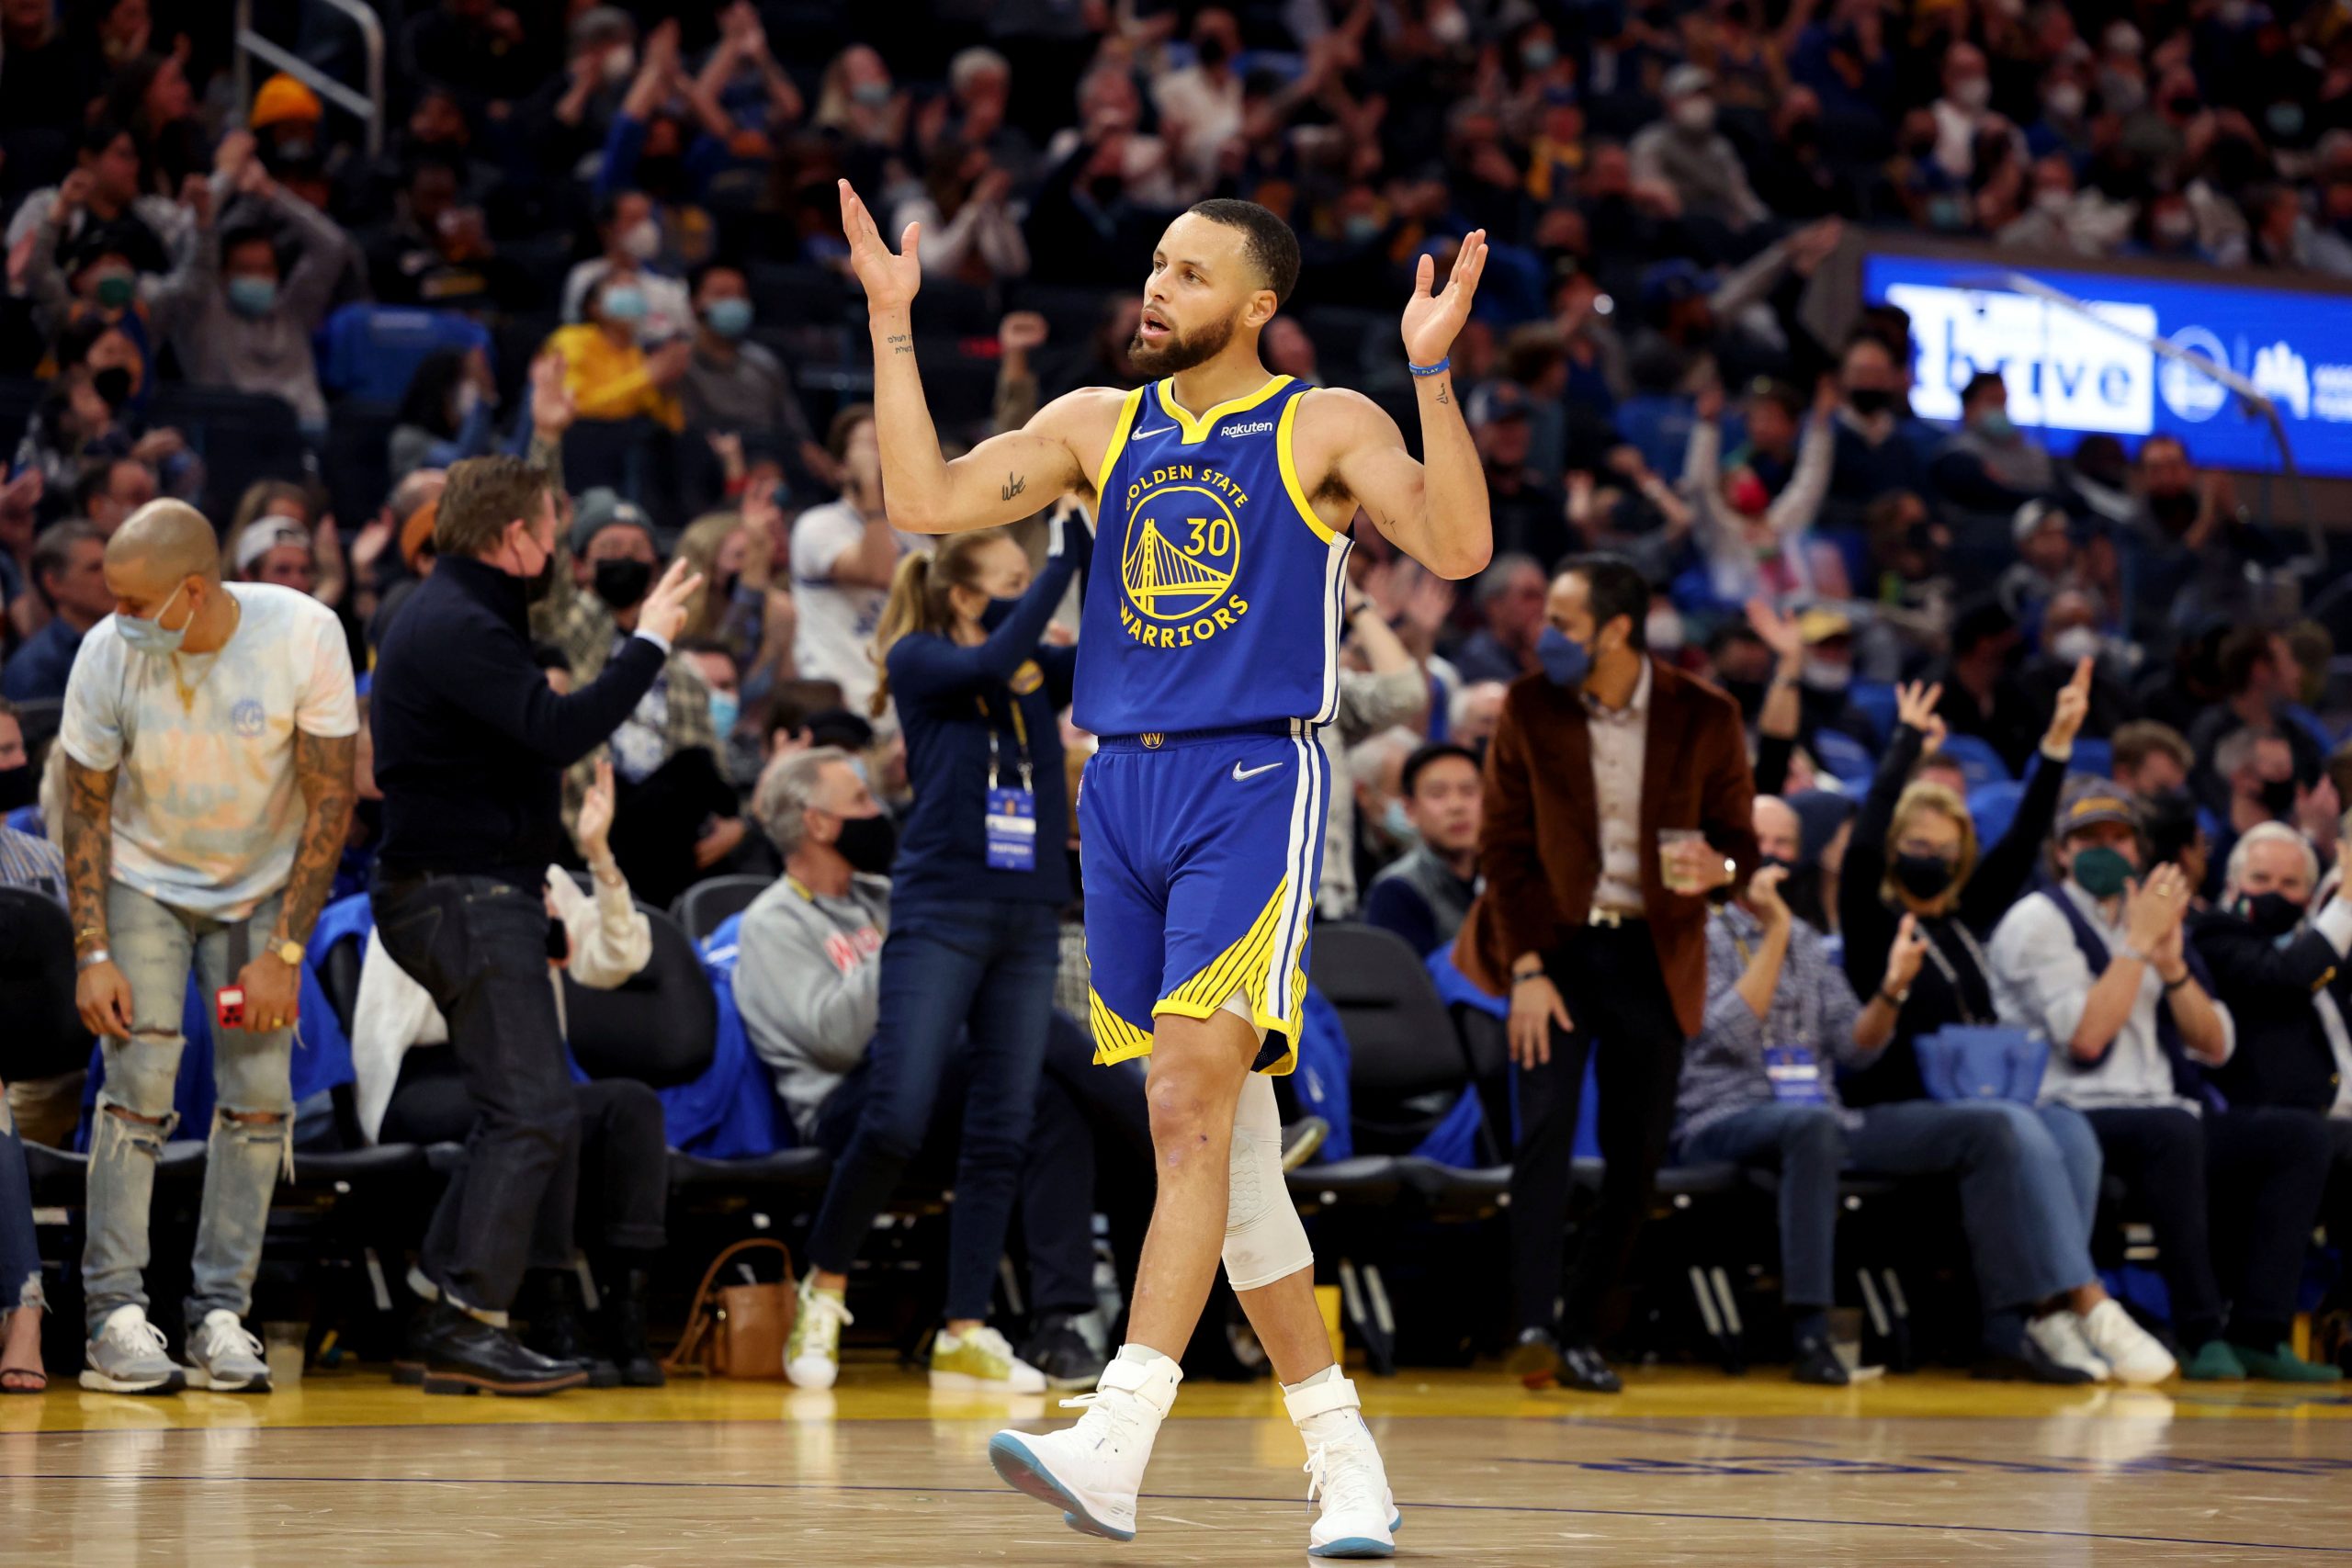 NBA: Undermanned Pacers stun Curry, Warriors 121-117 in overtime